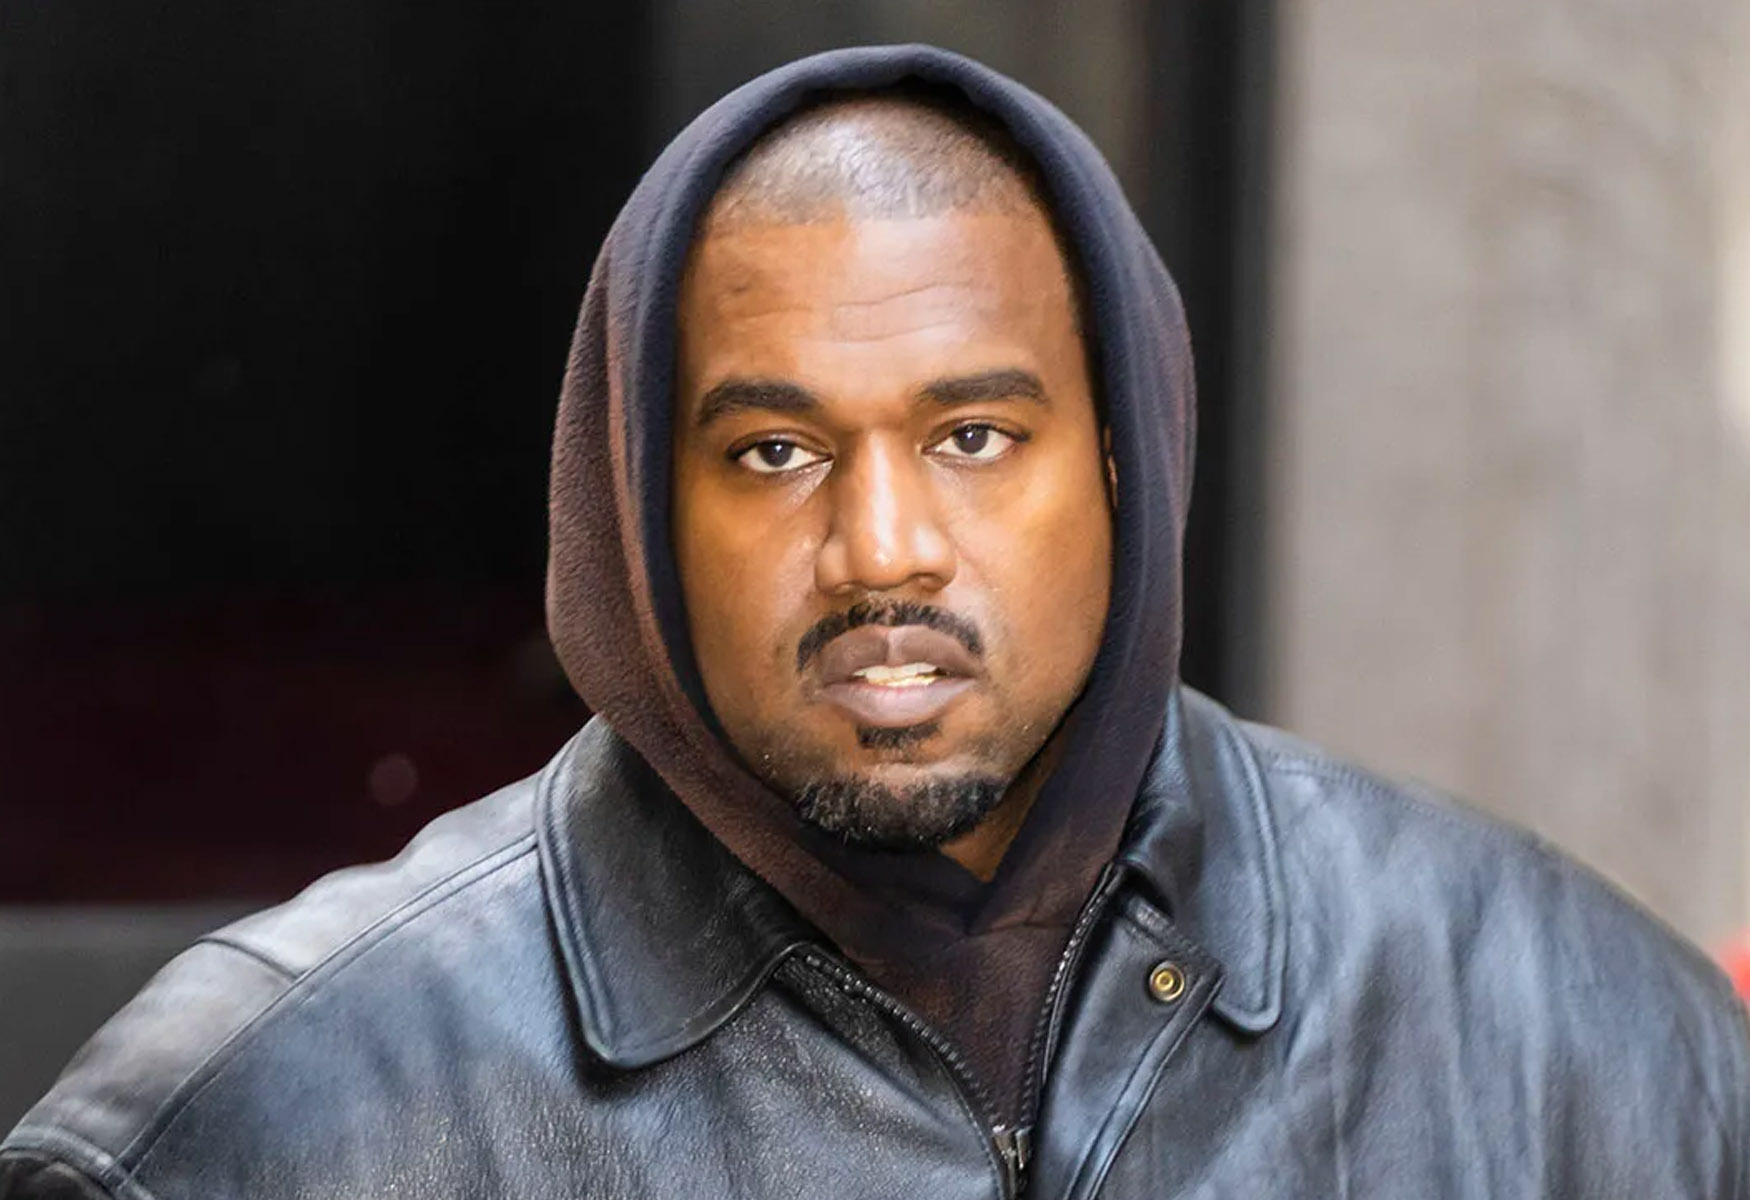 Kanye West Sparks Controversy With KKK-Style Black Hood At ‘Vultures’ Album Listening Party